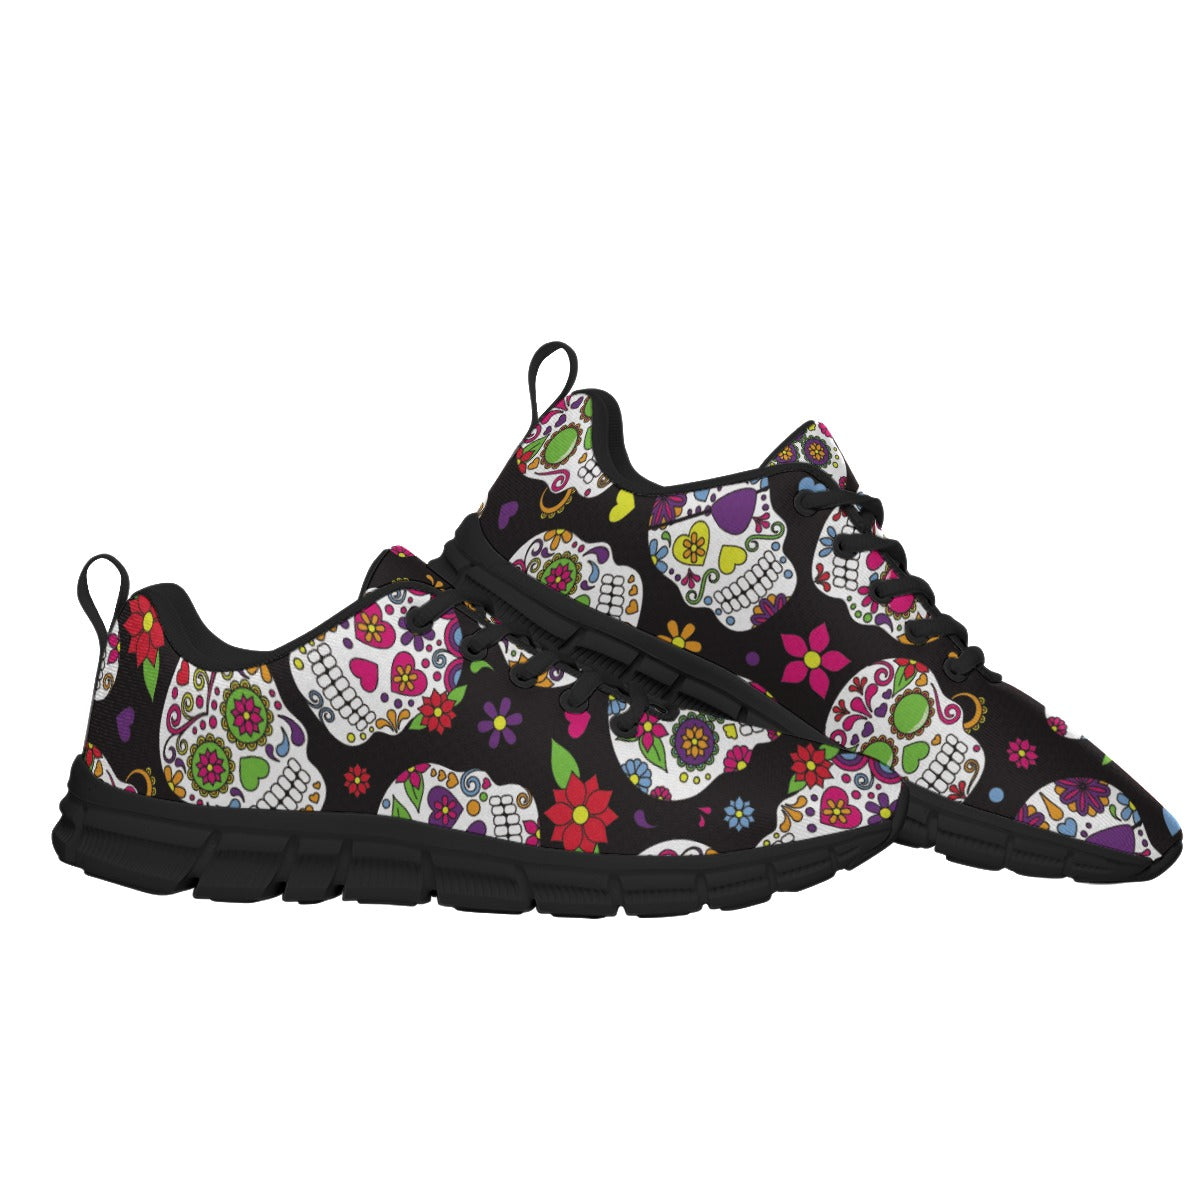 Sugar skull Women's Sports Shoes, day of the dead women shoes, sugar skull sneakers